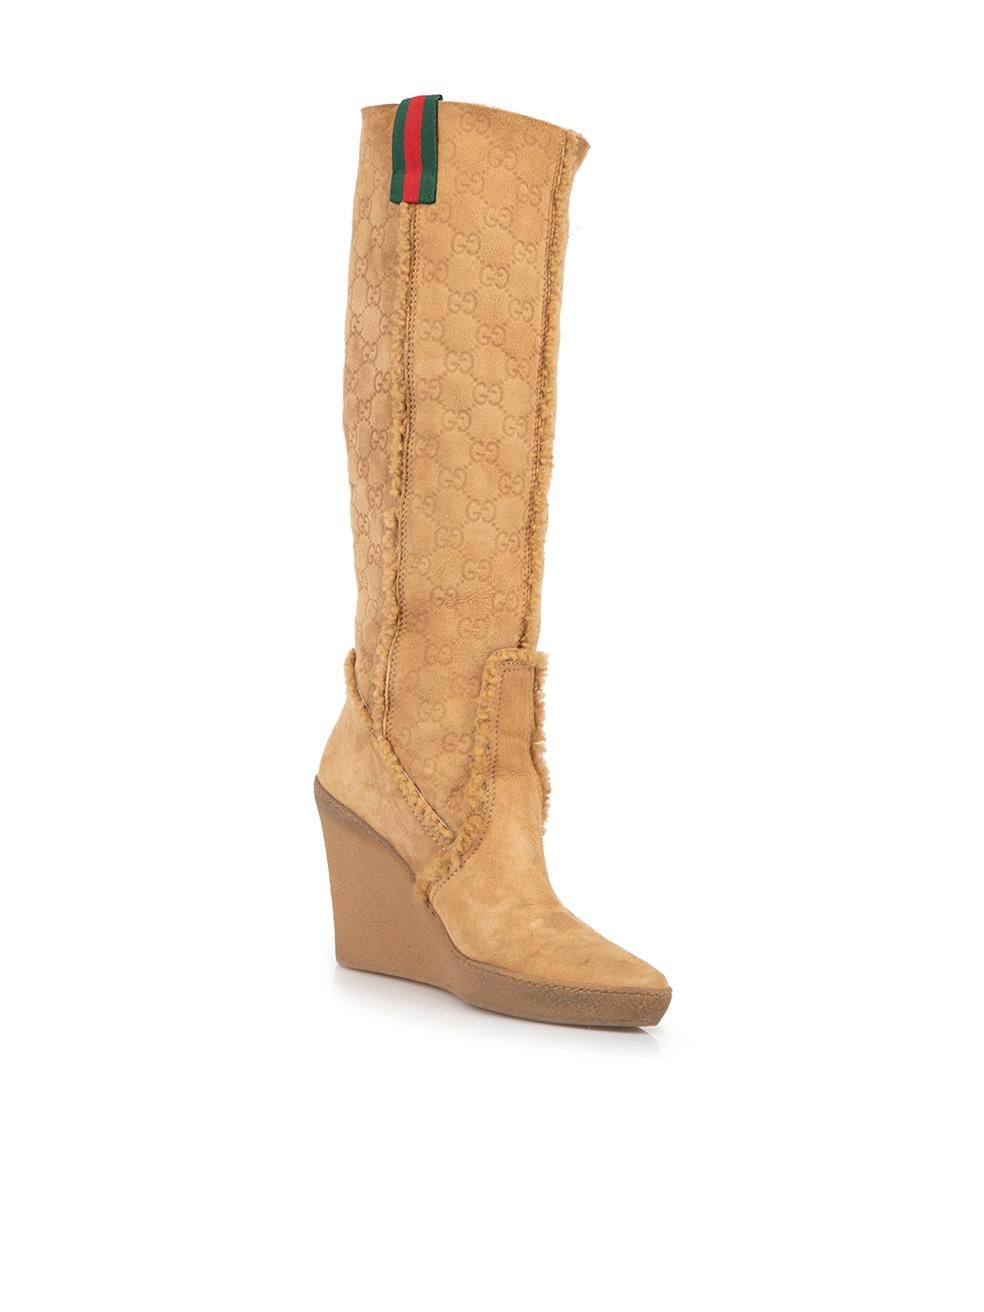 CONDITION is Very good. Minimal wear to boots is evident. Minimal wear to the suede exterior on this used Gucci designer resale item. 



Details


Camel

Suede

Knee high boots

Almond toe

Wedge heel

GG Monogram pattern

Shearling lined and